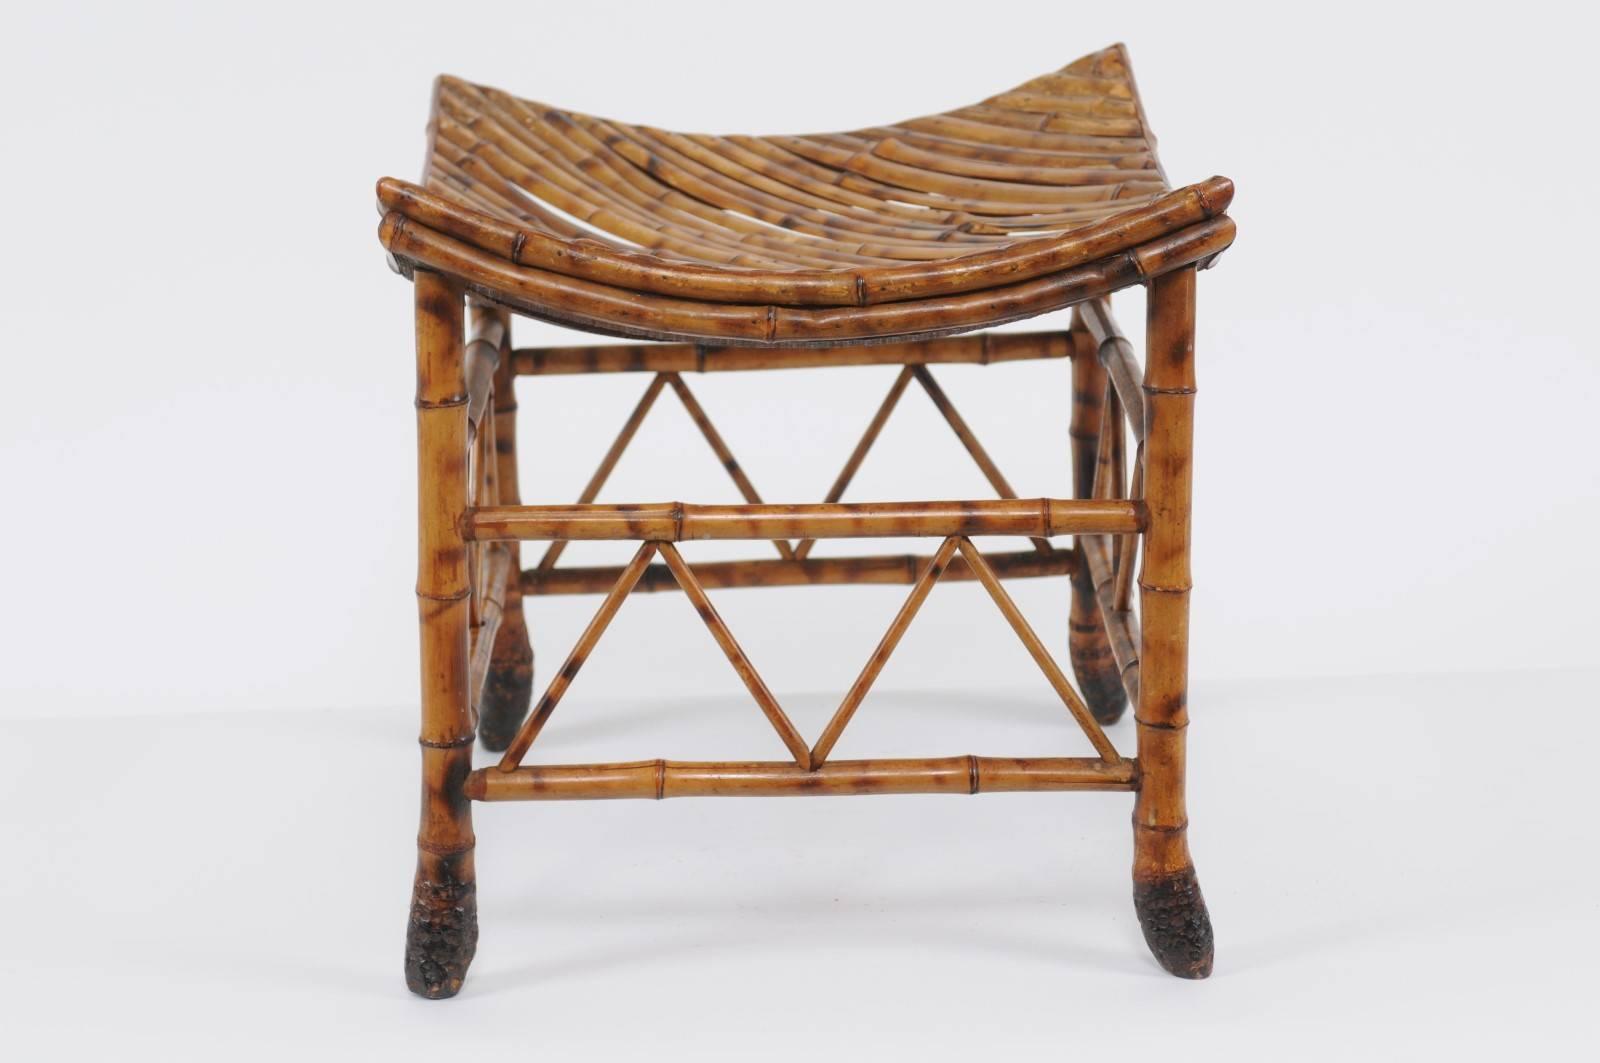 Egyptian Revival Thebes Bamboo Stool from Early 20th Century, England 4